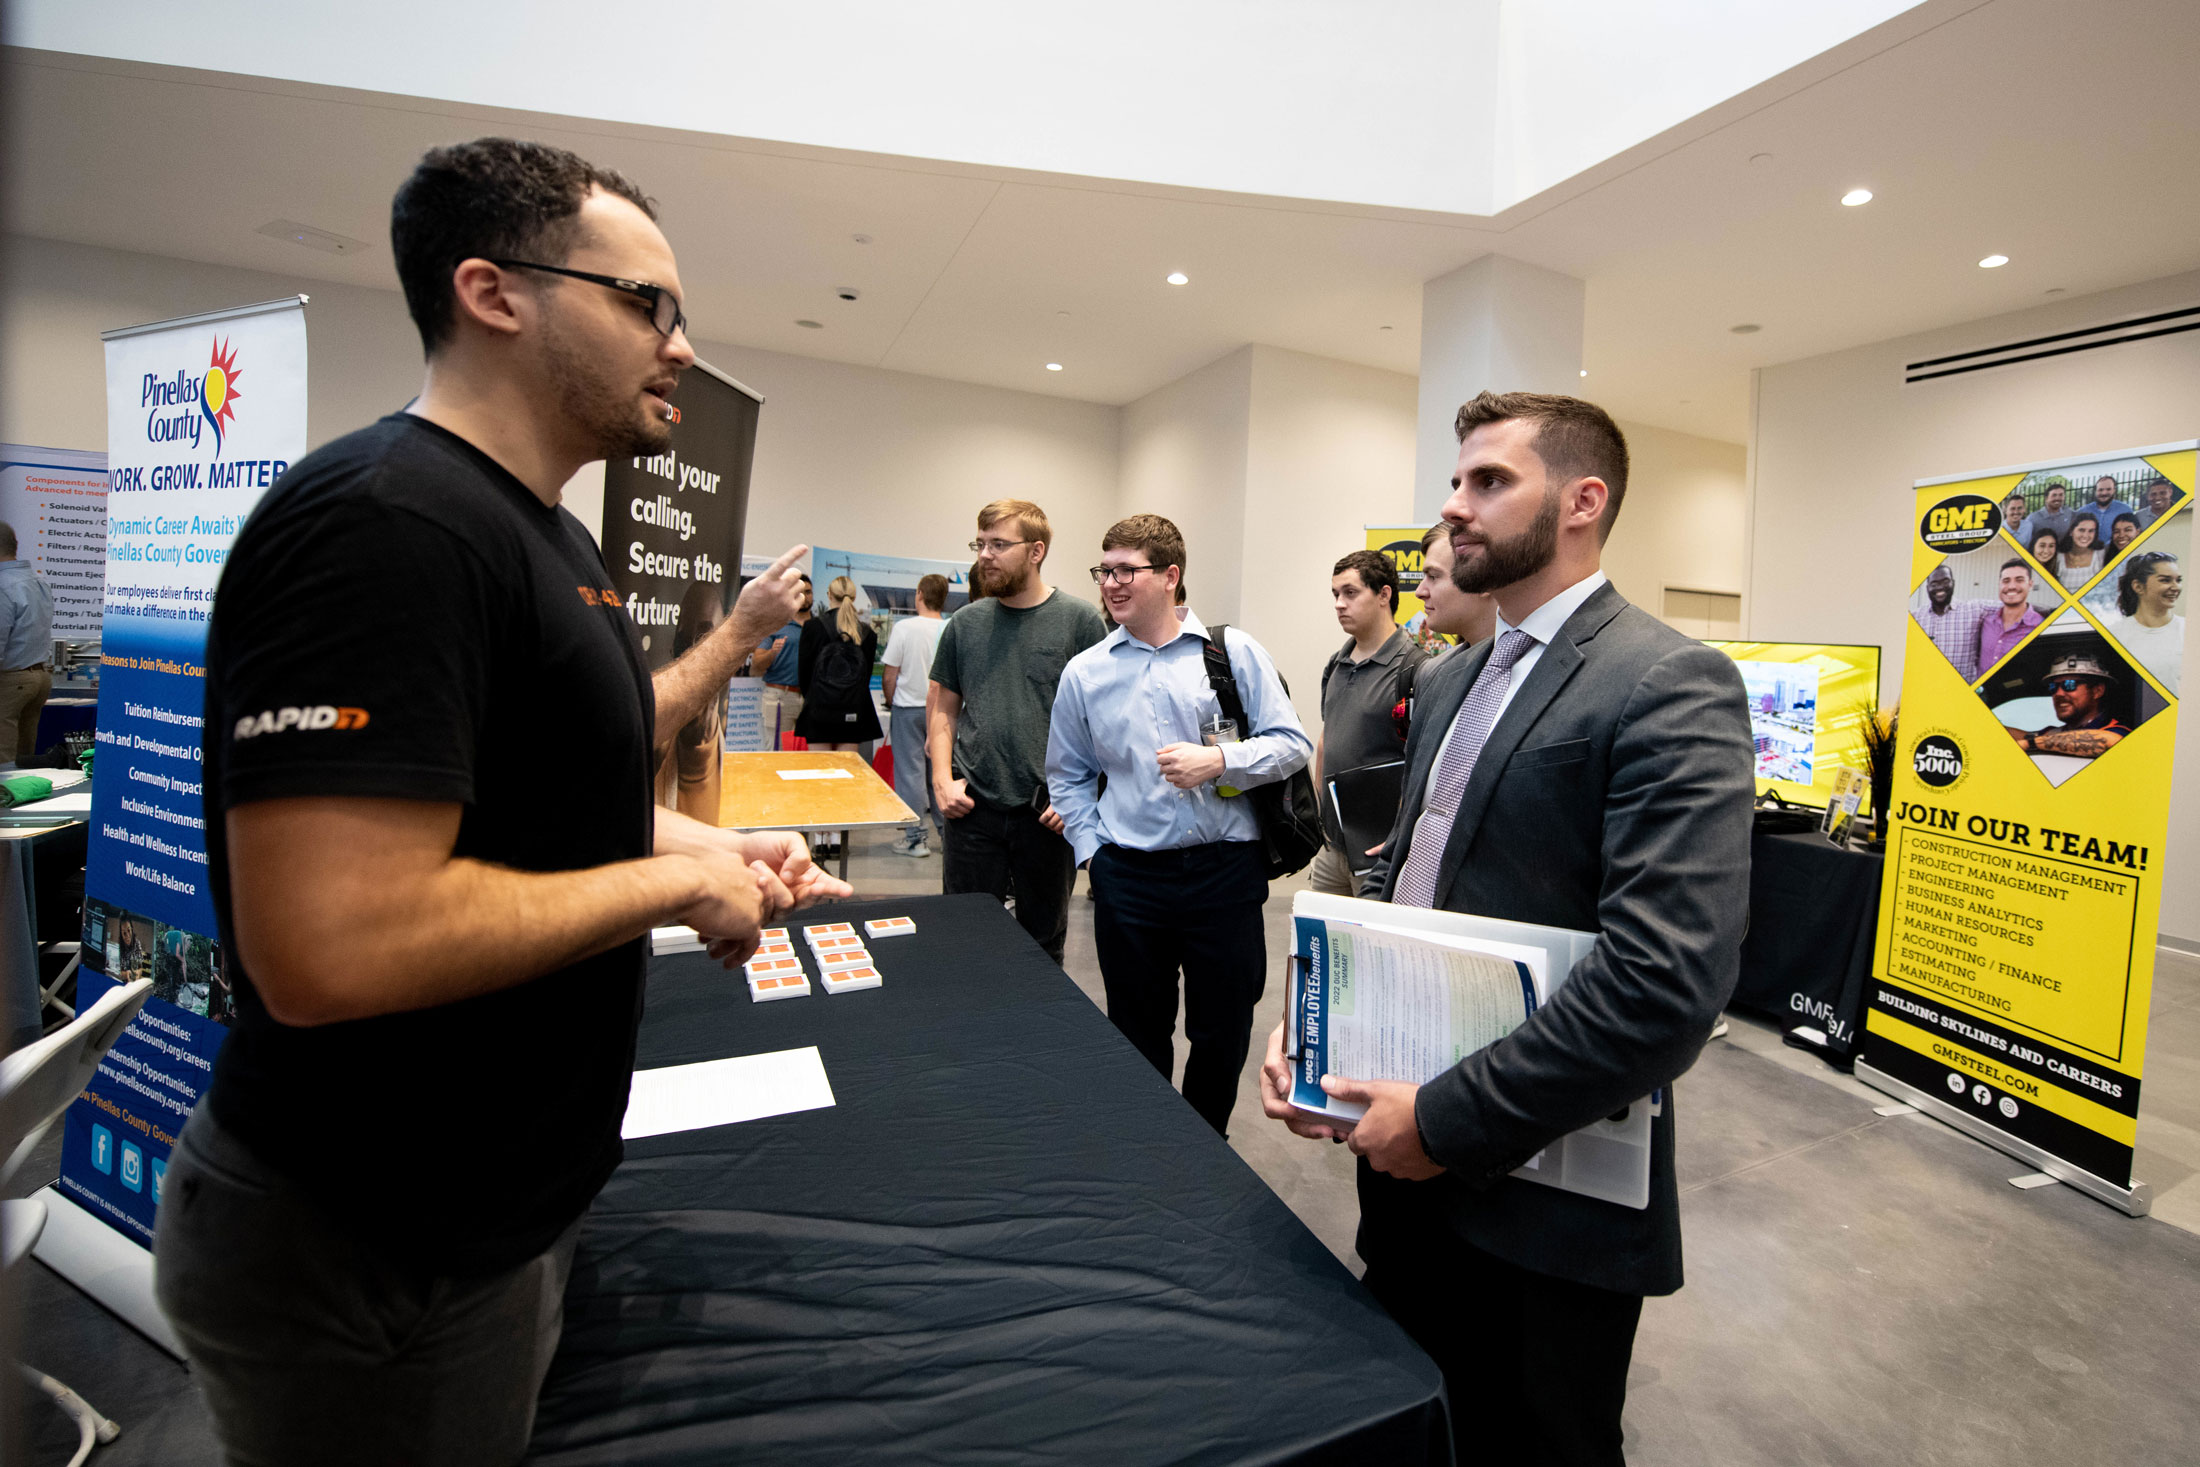 Students to get boost in spring career fair prep